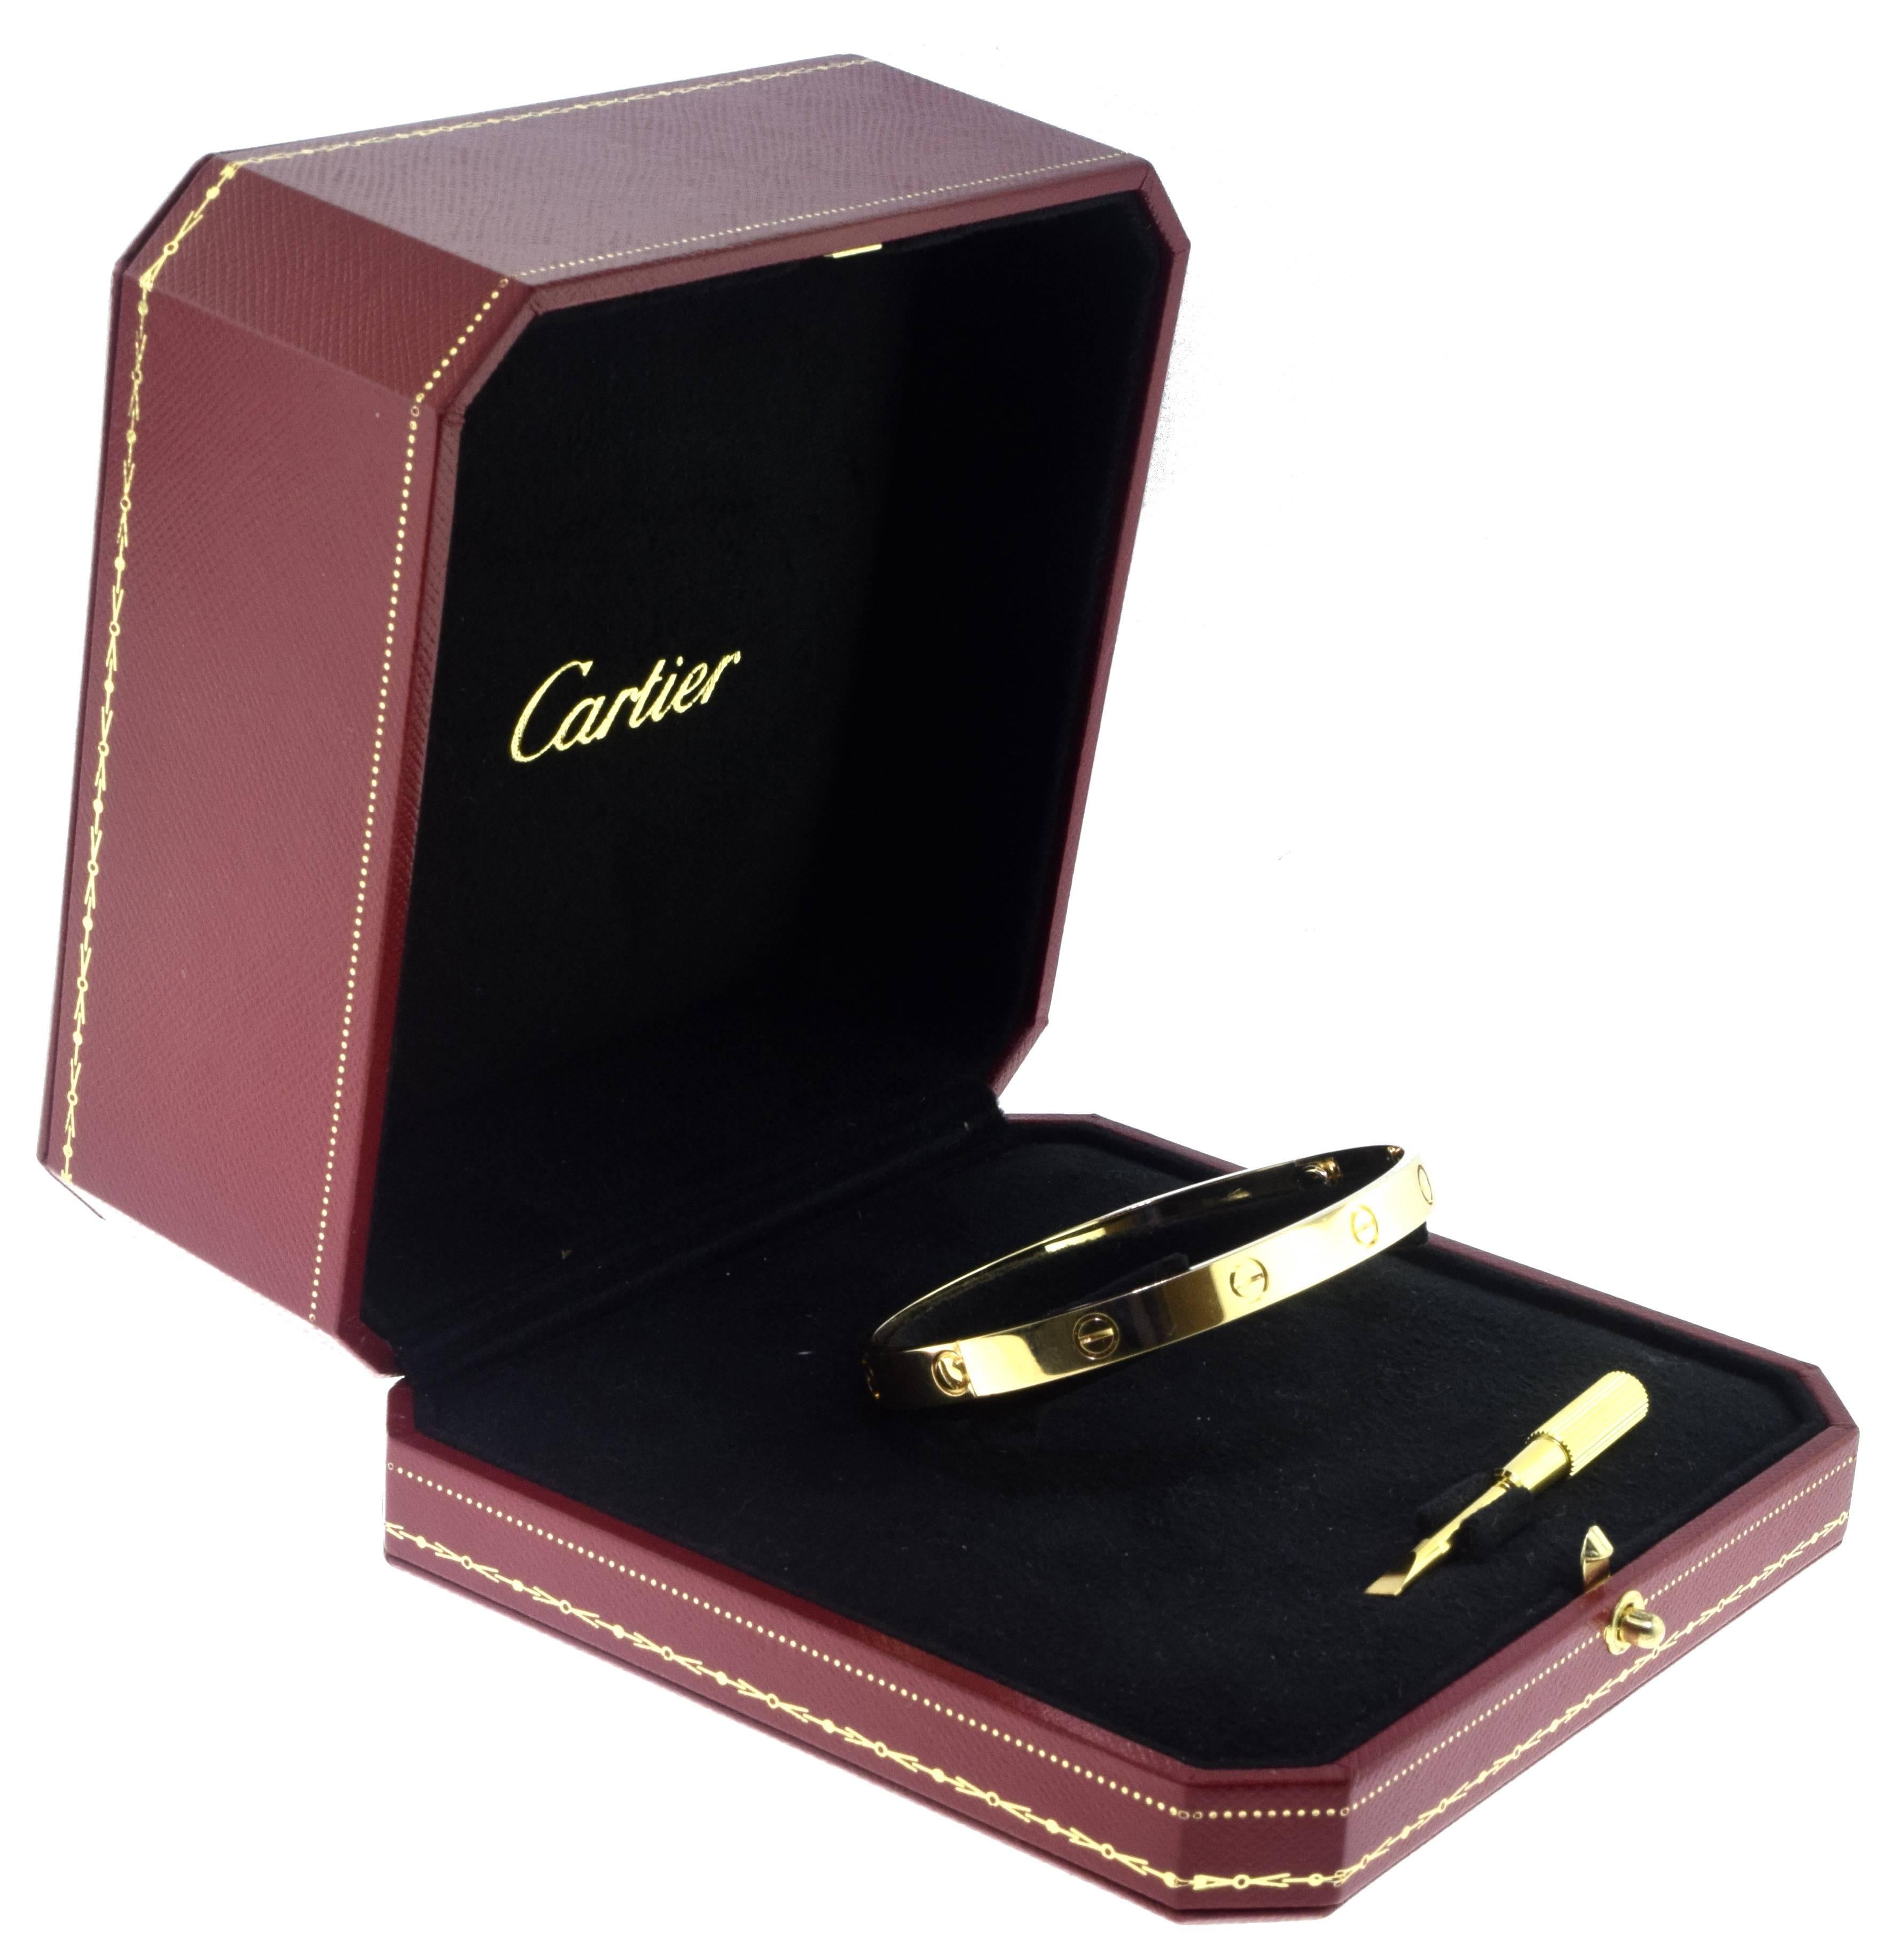 From Cartier's LOVE Collection:

Metal: 18k Yellow Gold
Bracelet Size: 19
Total Item Weight (g): 37.0
Hallmarks: Cartier Au750 19 Serial Number
Screw System: New Screw
Includes: Box & Certificate of Authenticity